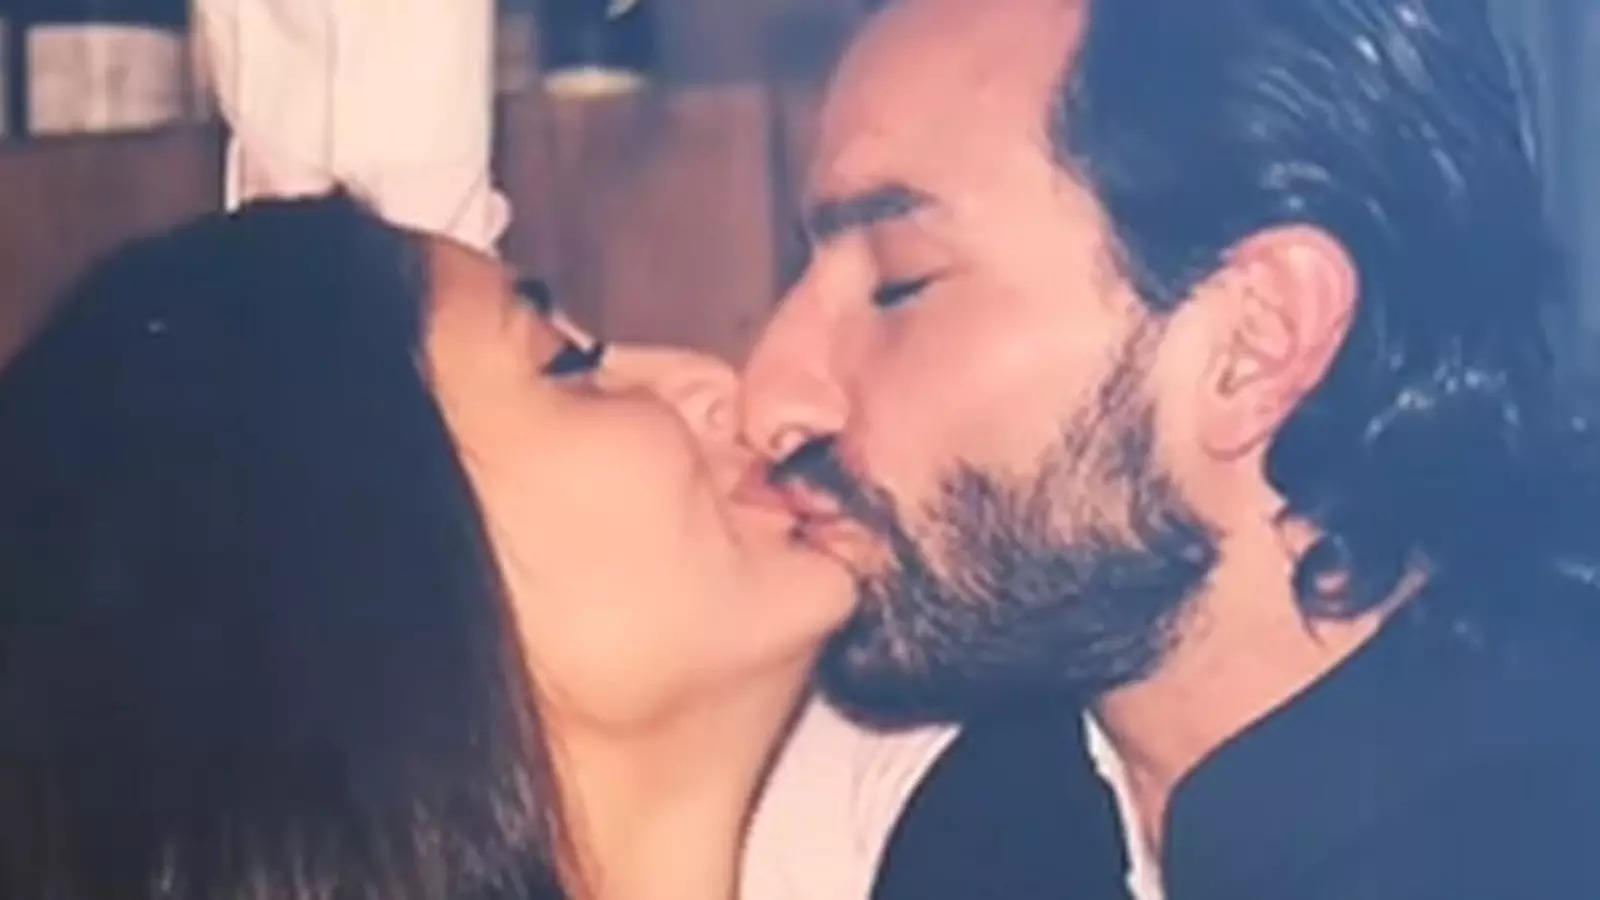 Saif Ali Khan Xx - Kareena-Saif Kissing Video: When Saif Ali Khan-Kareena Kapoor Khan revealed  why they stopped doing intimate scenes with co-actors on screen: 'It makes  you feelâ€¦'